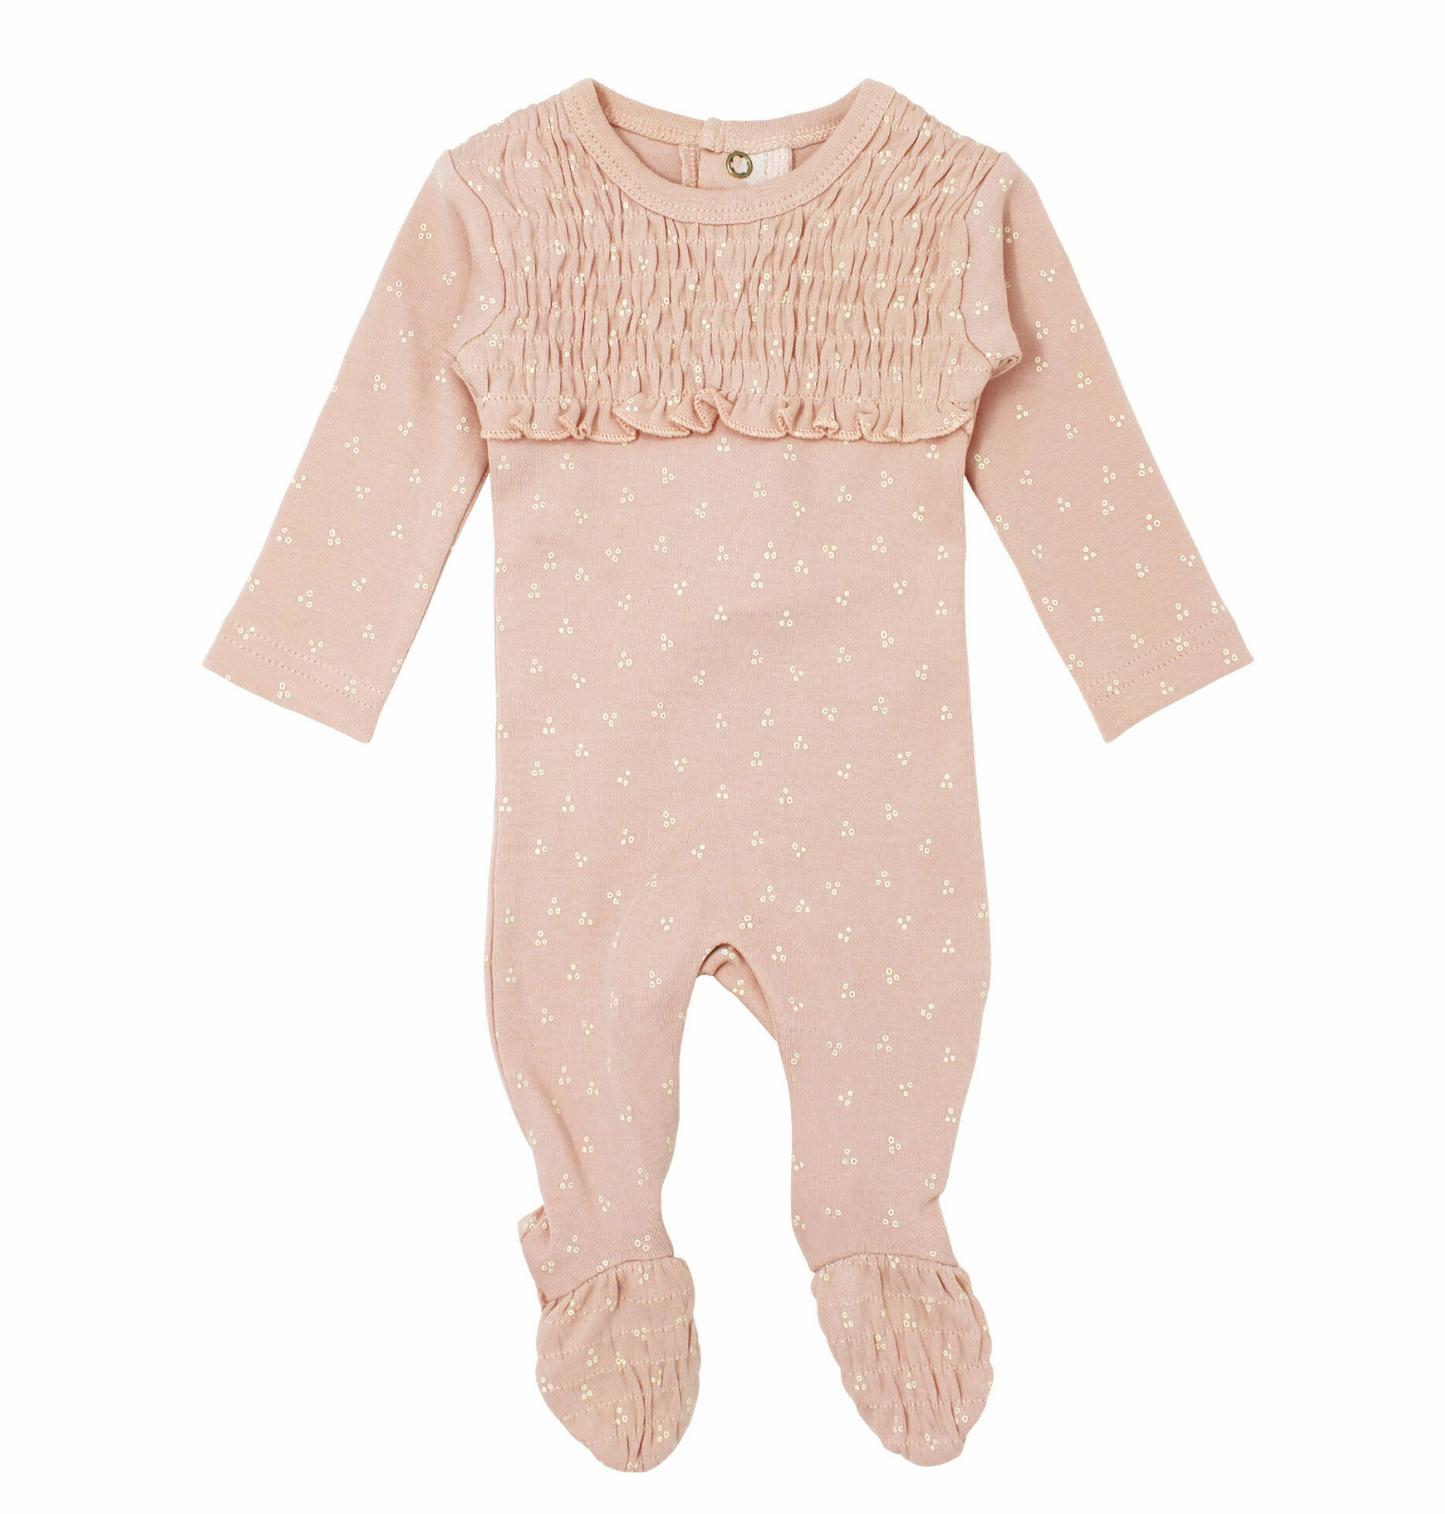 Organic Smocked Baby Footie in Rosewater Dots